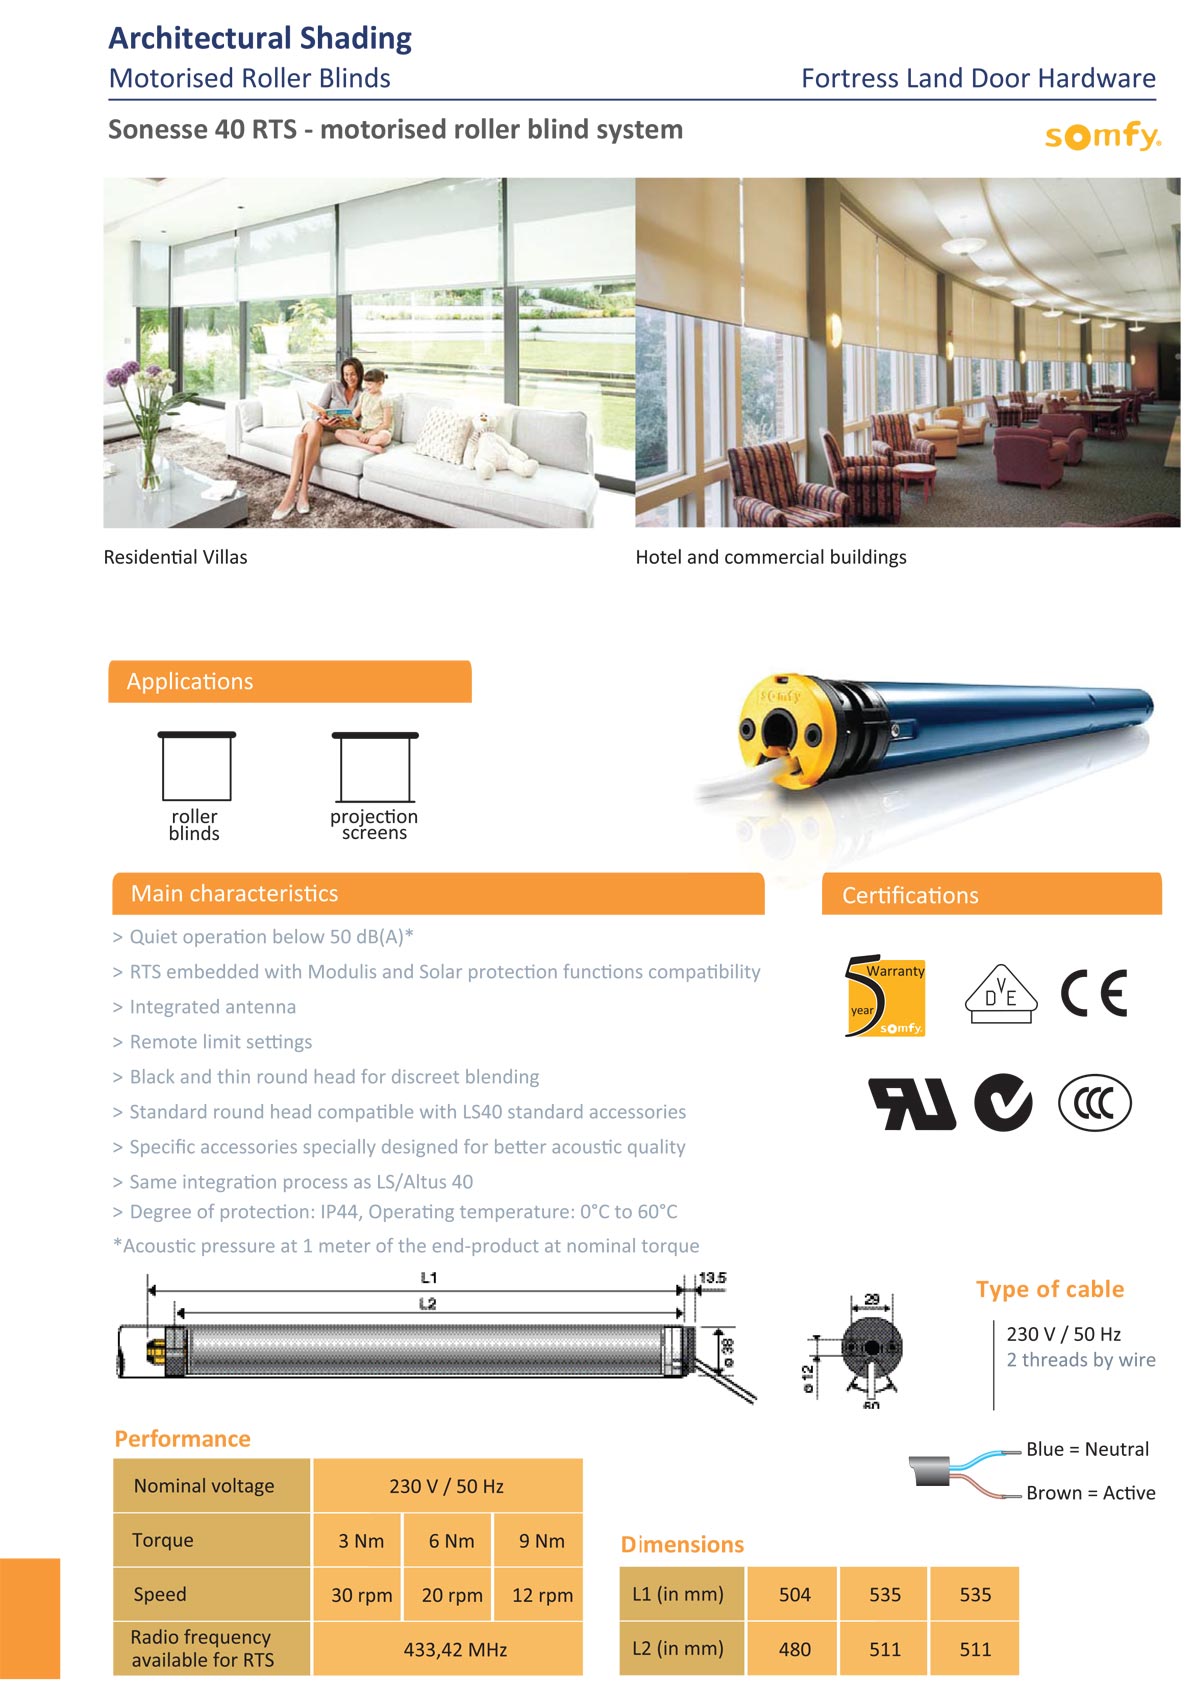 somfy motor, roller blind motor, automatic curtain, porinted roller blind, sunscreen blind motor, remote roller blind, black out roller blind, automatic roller blind, solar control, sun control, windor cover, Fortress Land Security Company Yangon, Myanmar